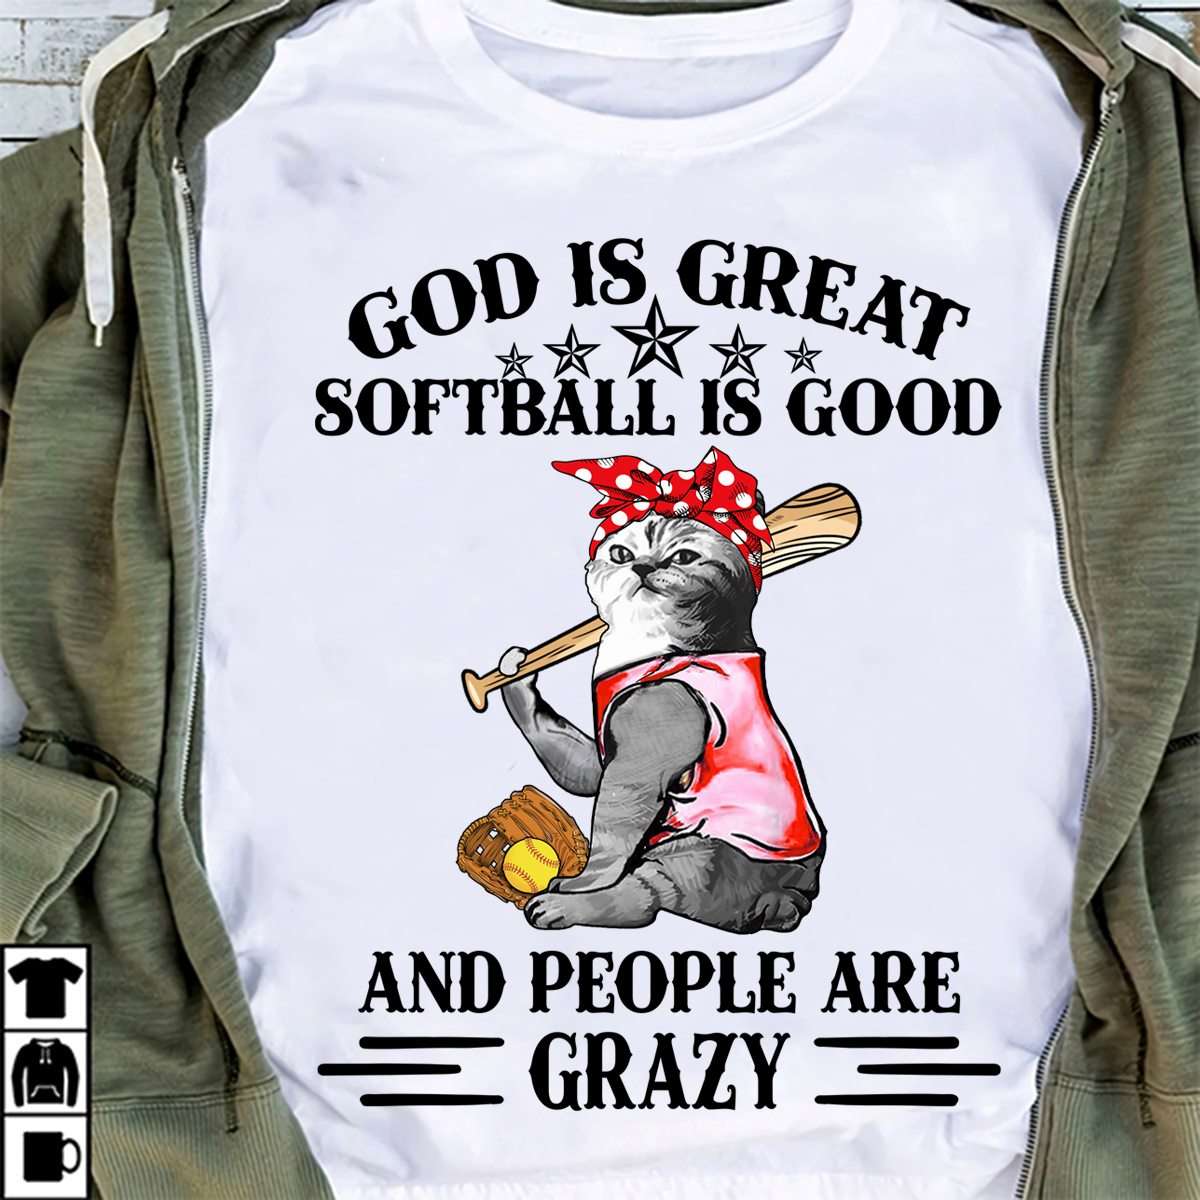 Softball Cat - God is great softball is good and people are crazy